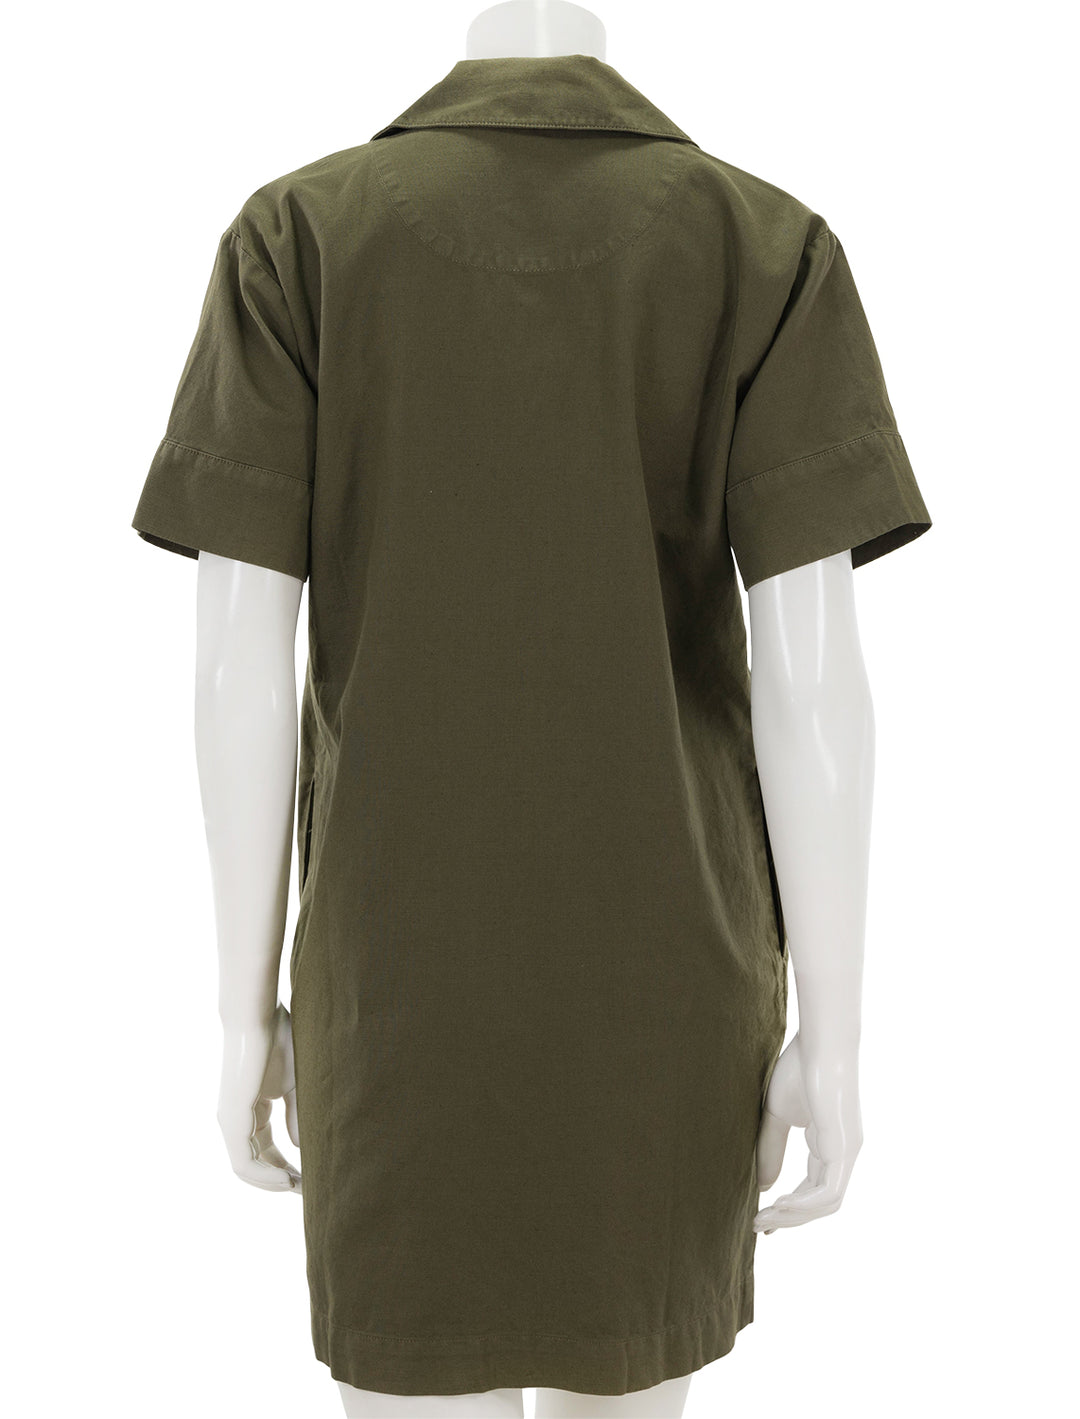 Back view of Faherty's palos verdes dress in military olive.